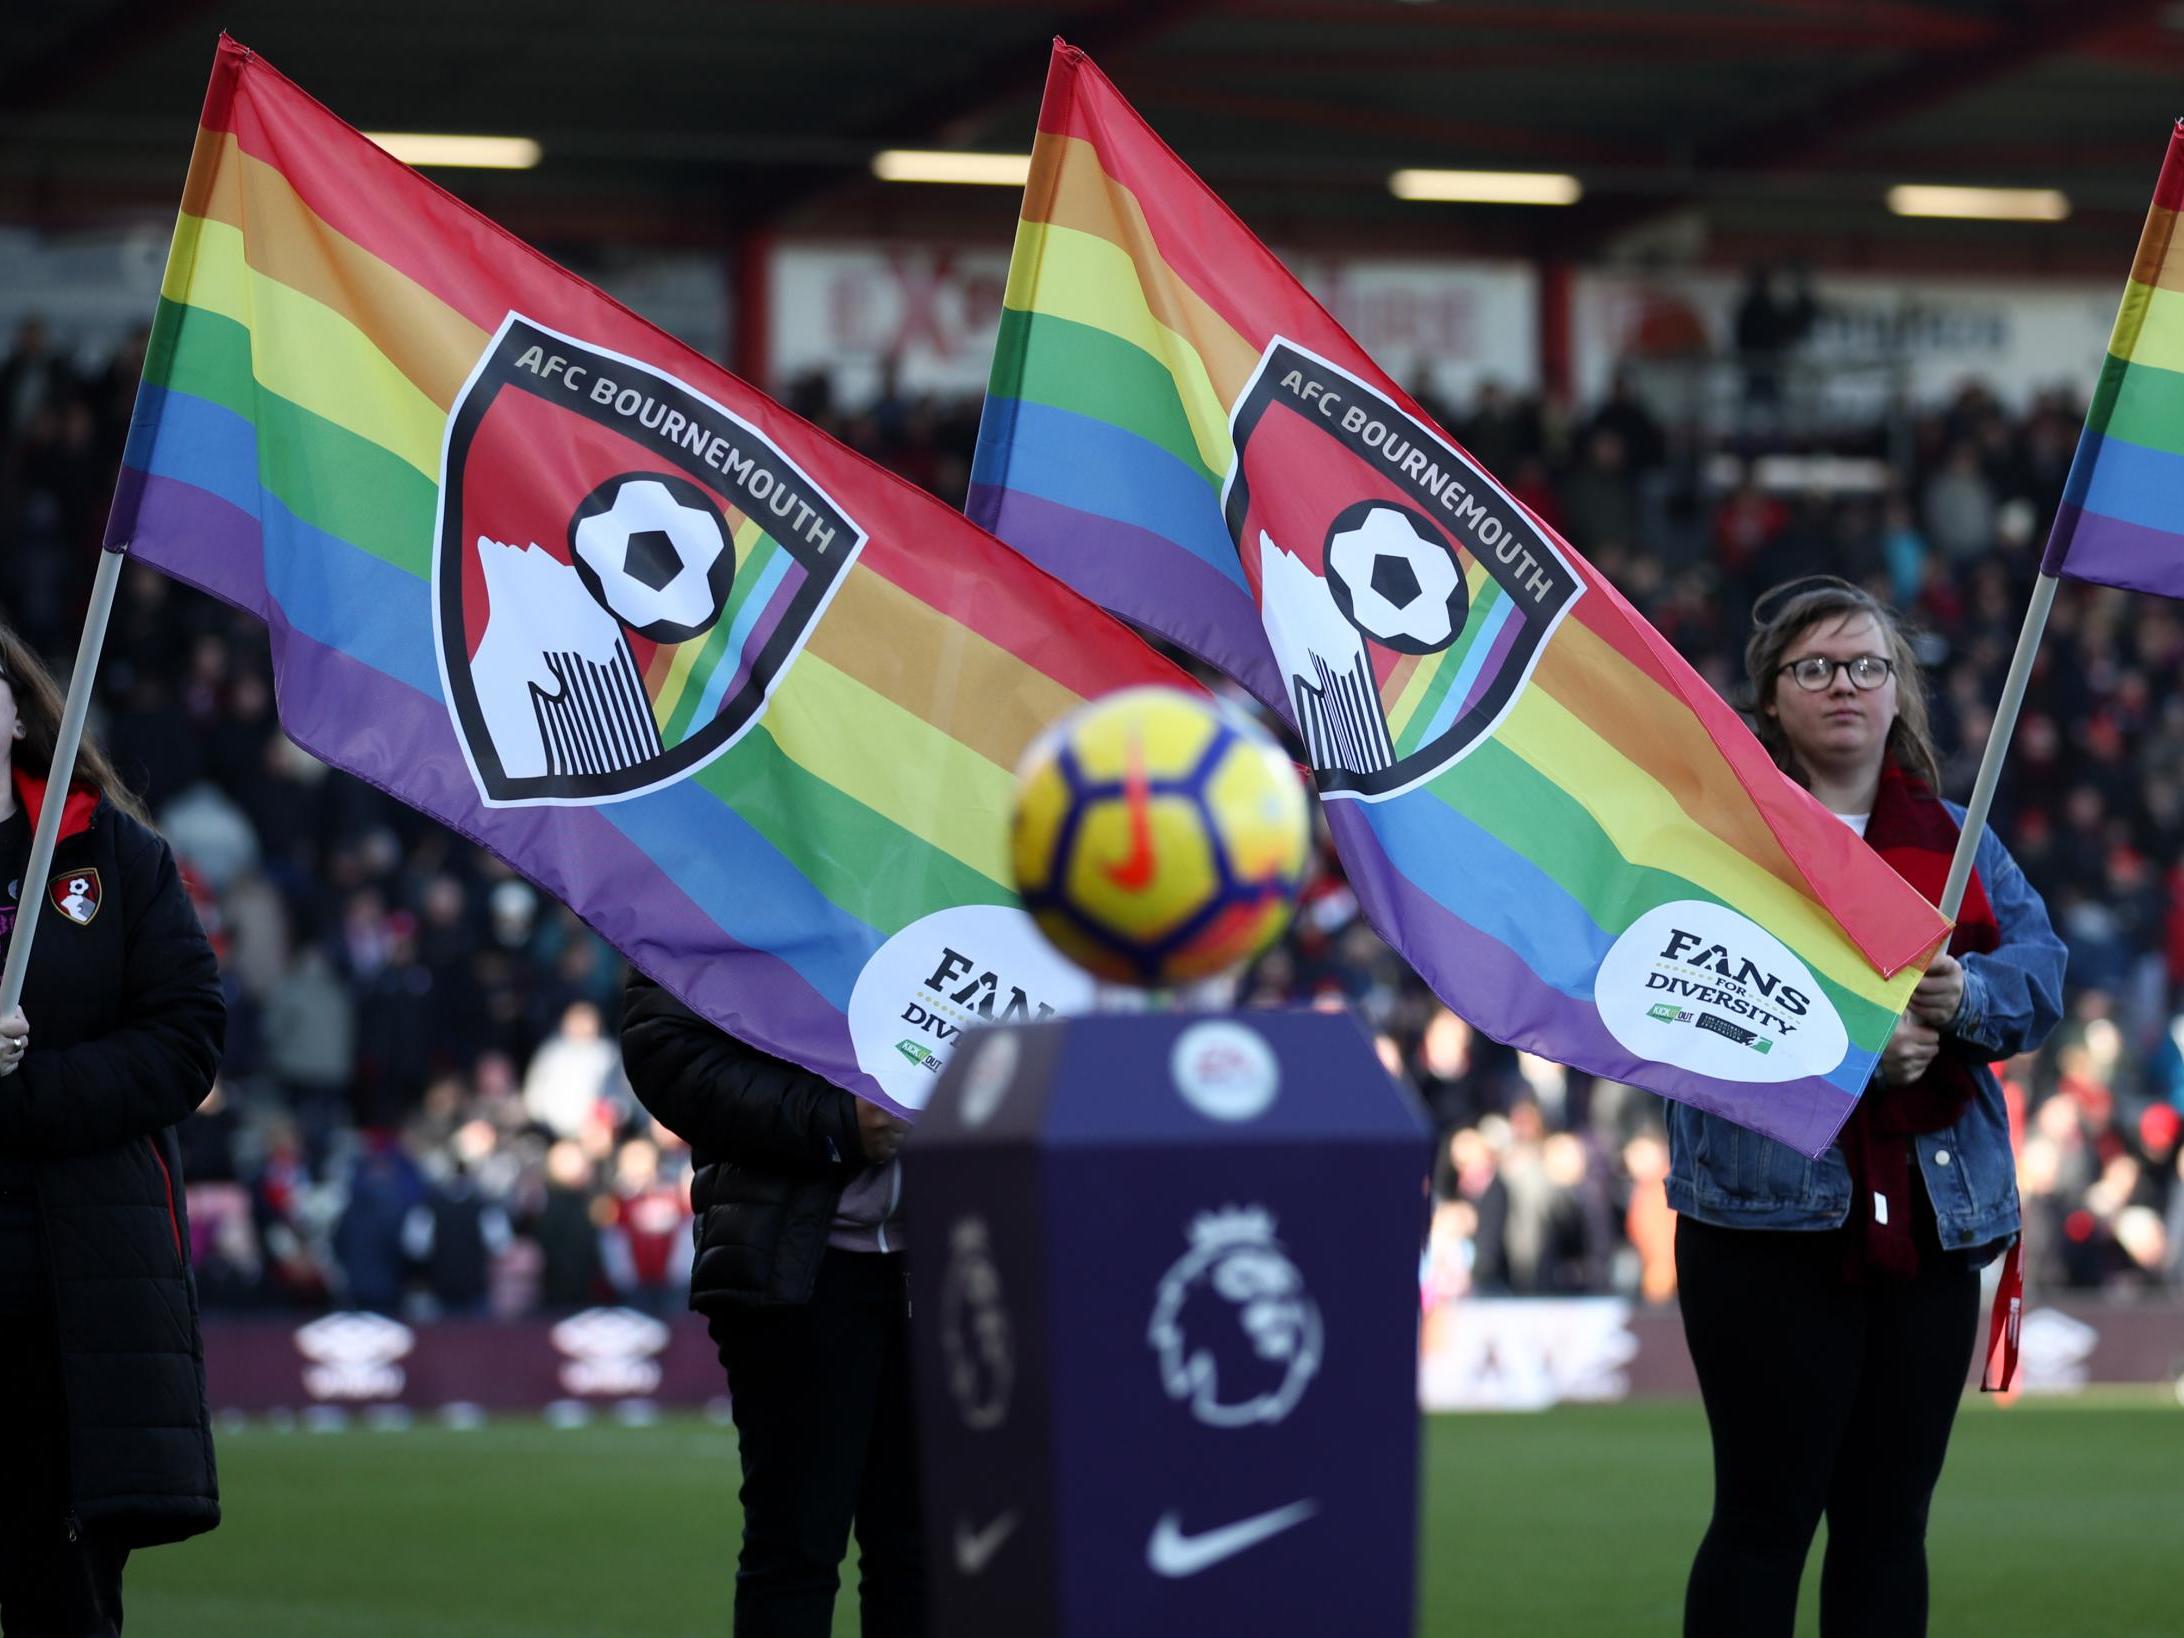 Football will be the most visible in terms of promoting the Rainbow Laces campaign yet the sport has so far to go